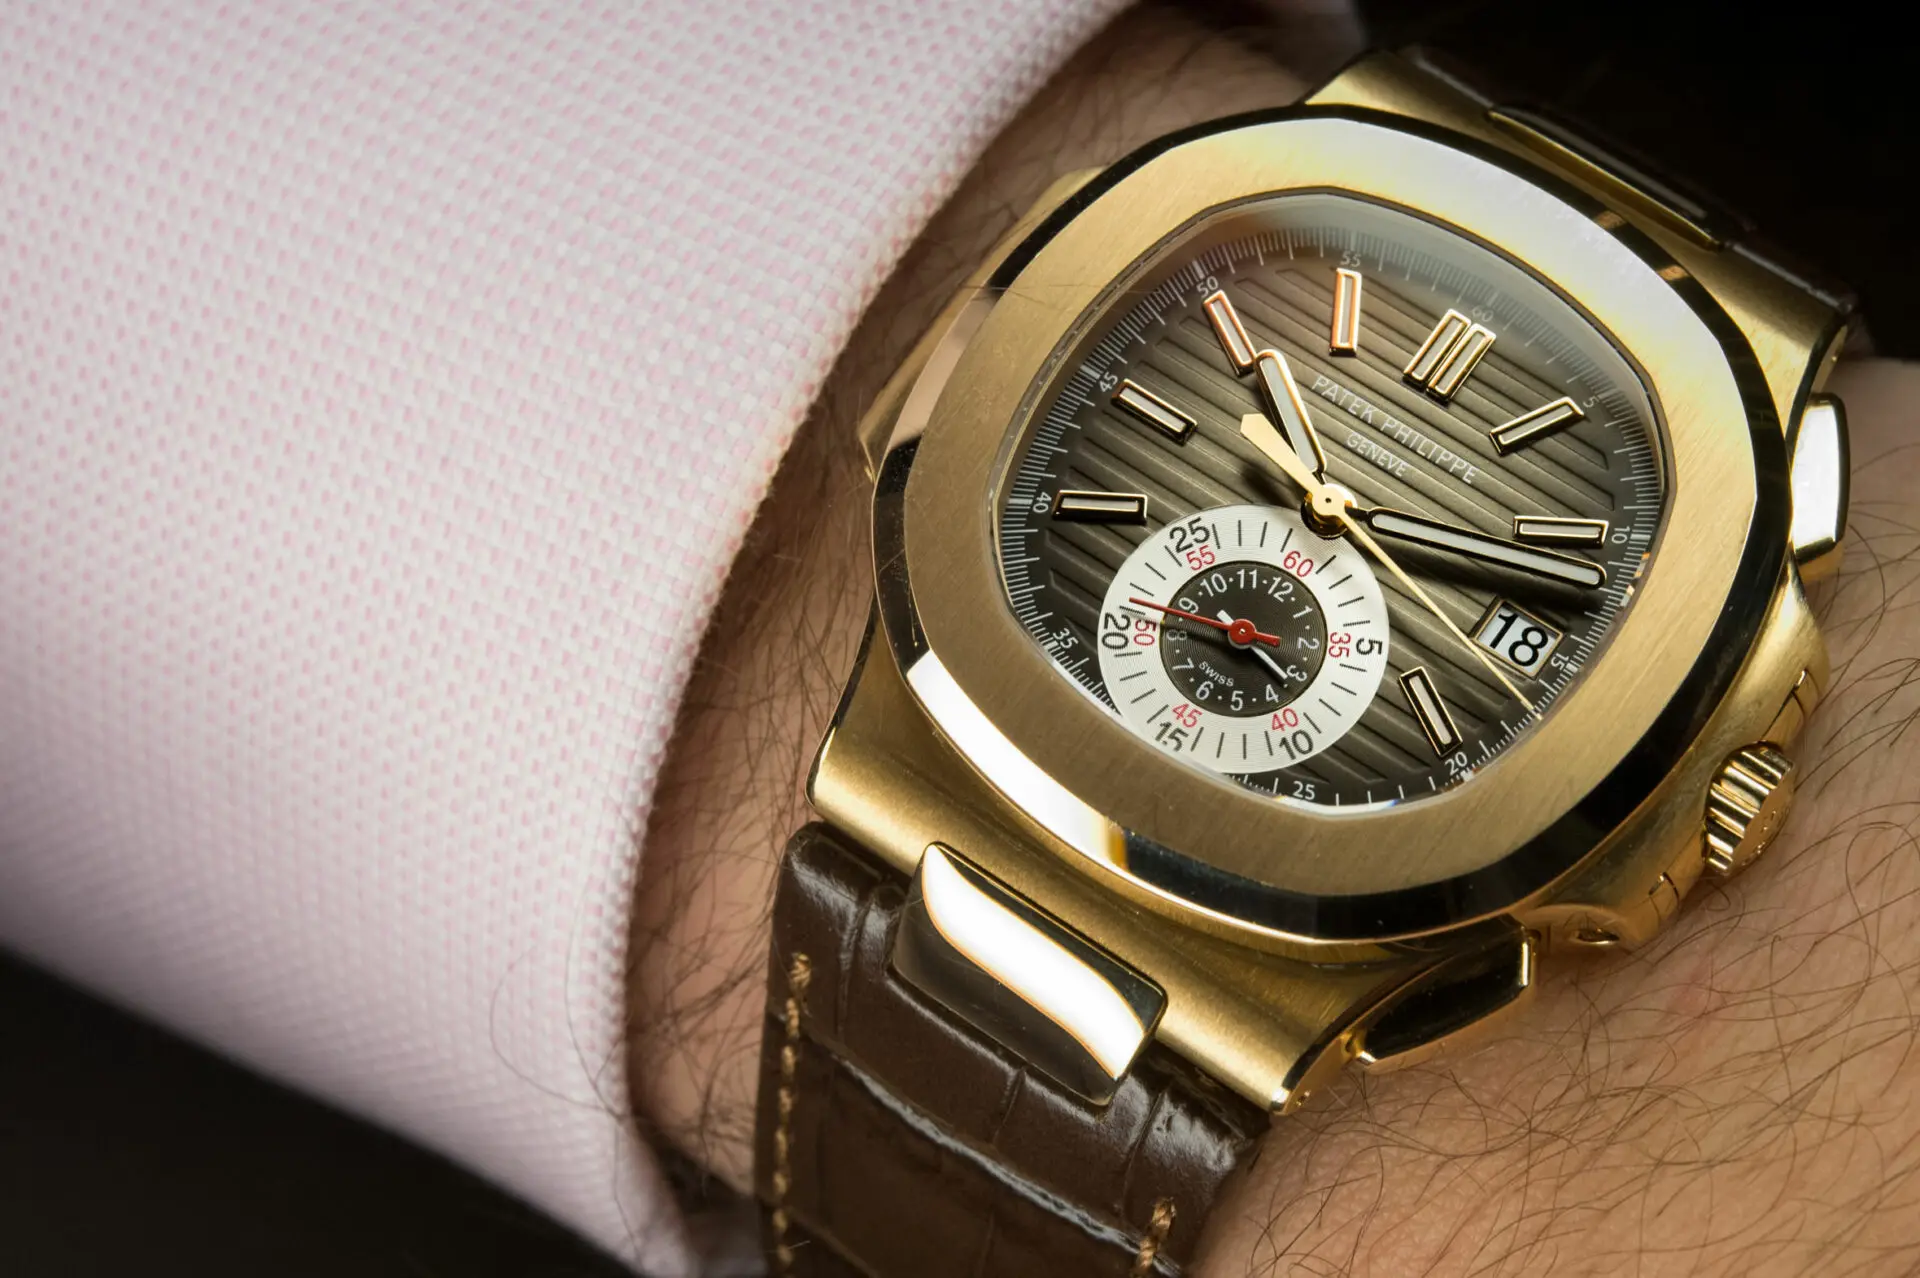 Thoughts on the Patek Philippe Nautilus ref.5711 (and why I didn't